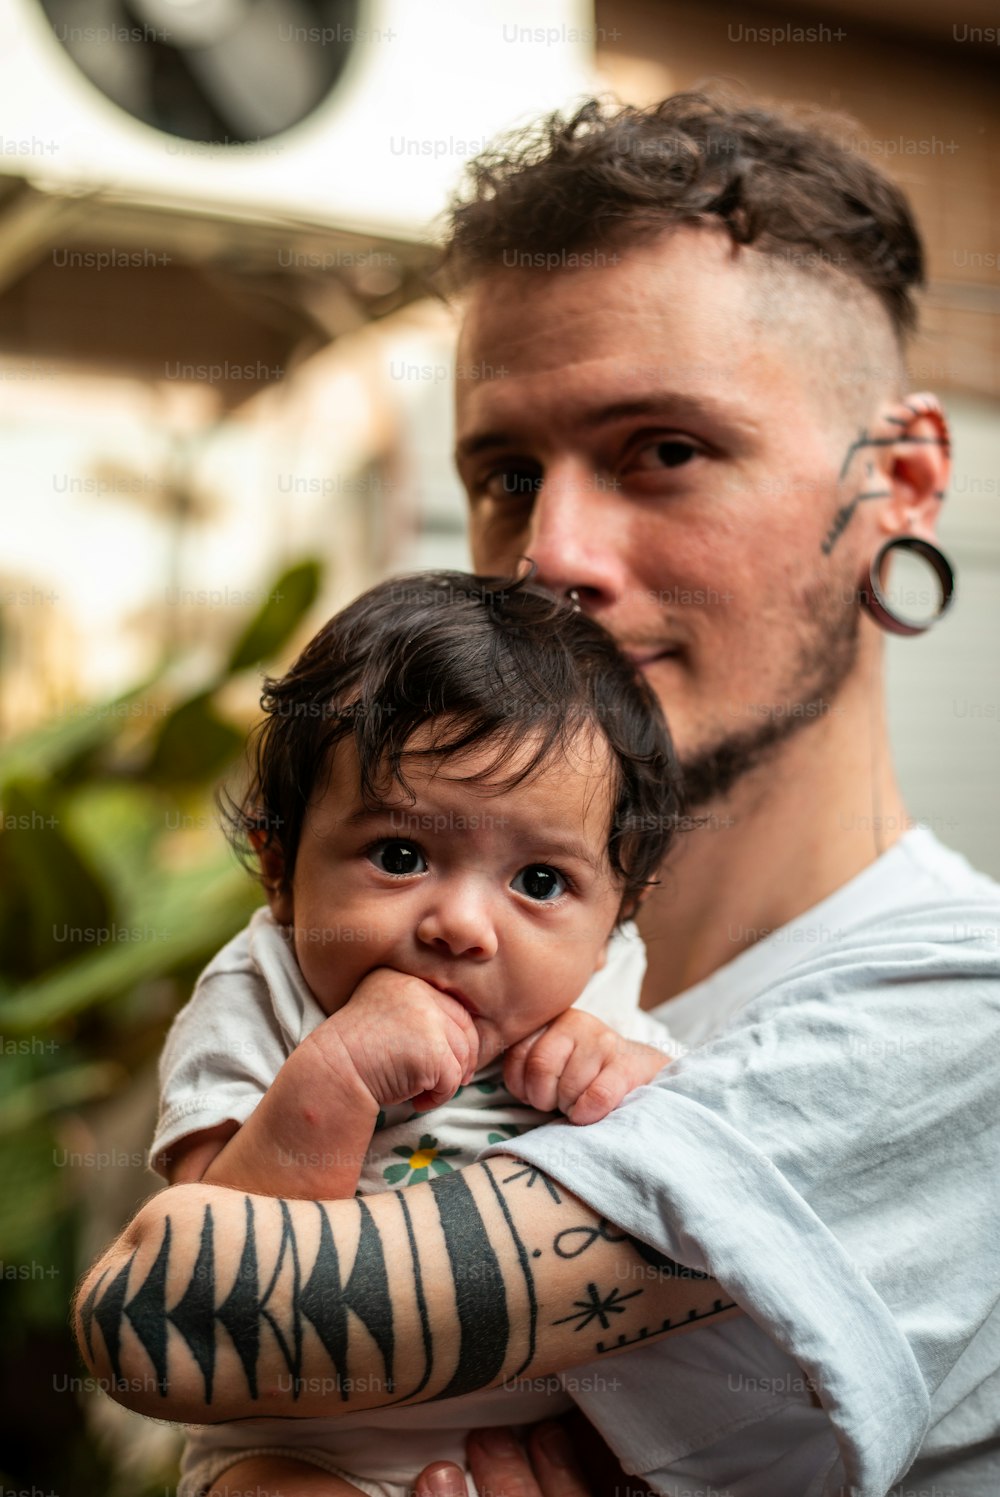 a man holding a baby with tattoos on his arms